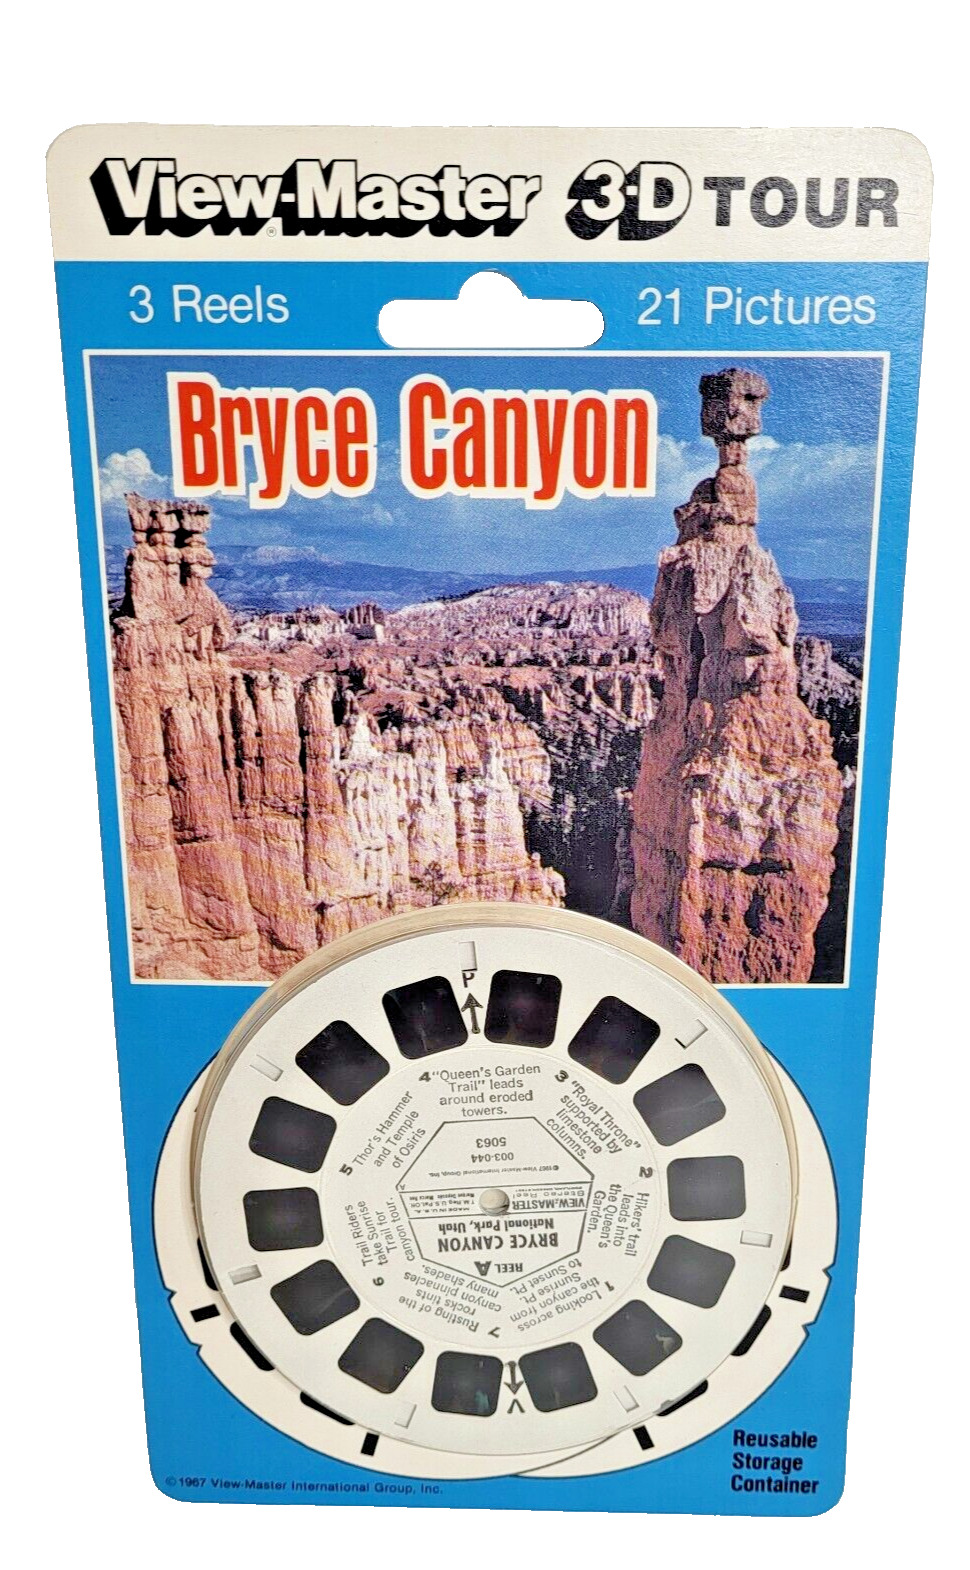 1967 View-Master Bryce Canyon 3D Tour 3 Reels 21 Pictures